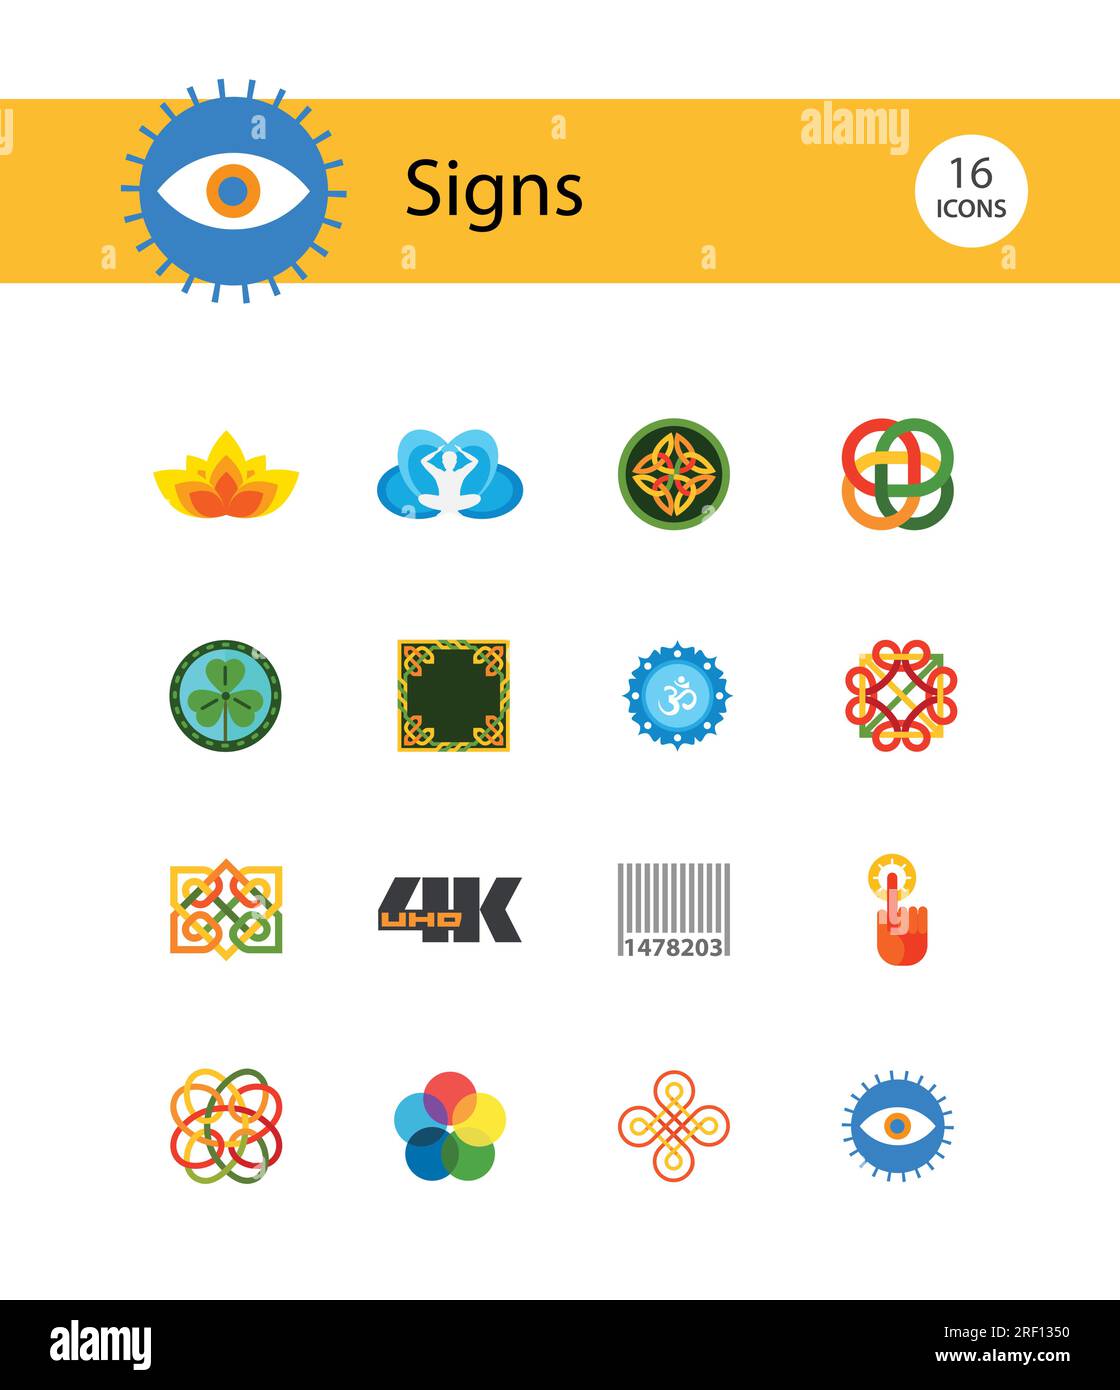 Signs flat icons set Stock Vector